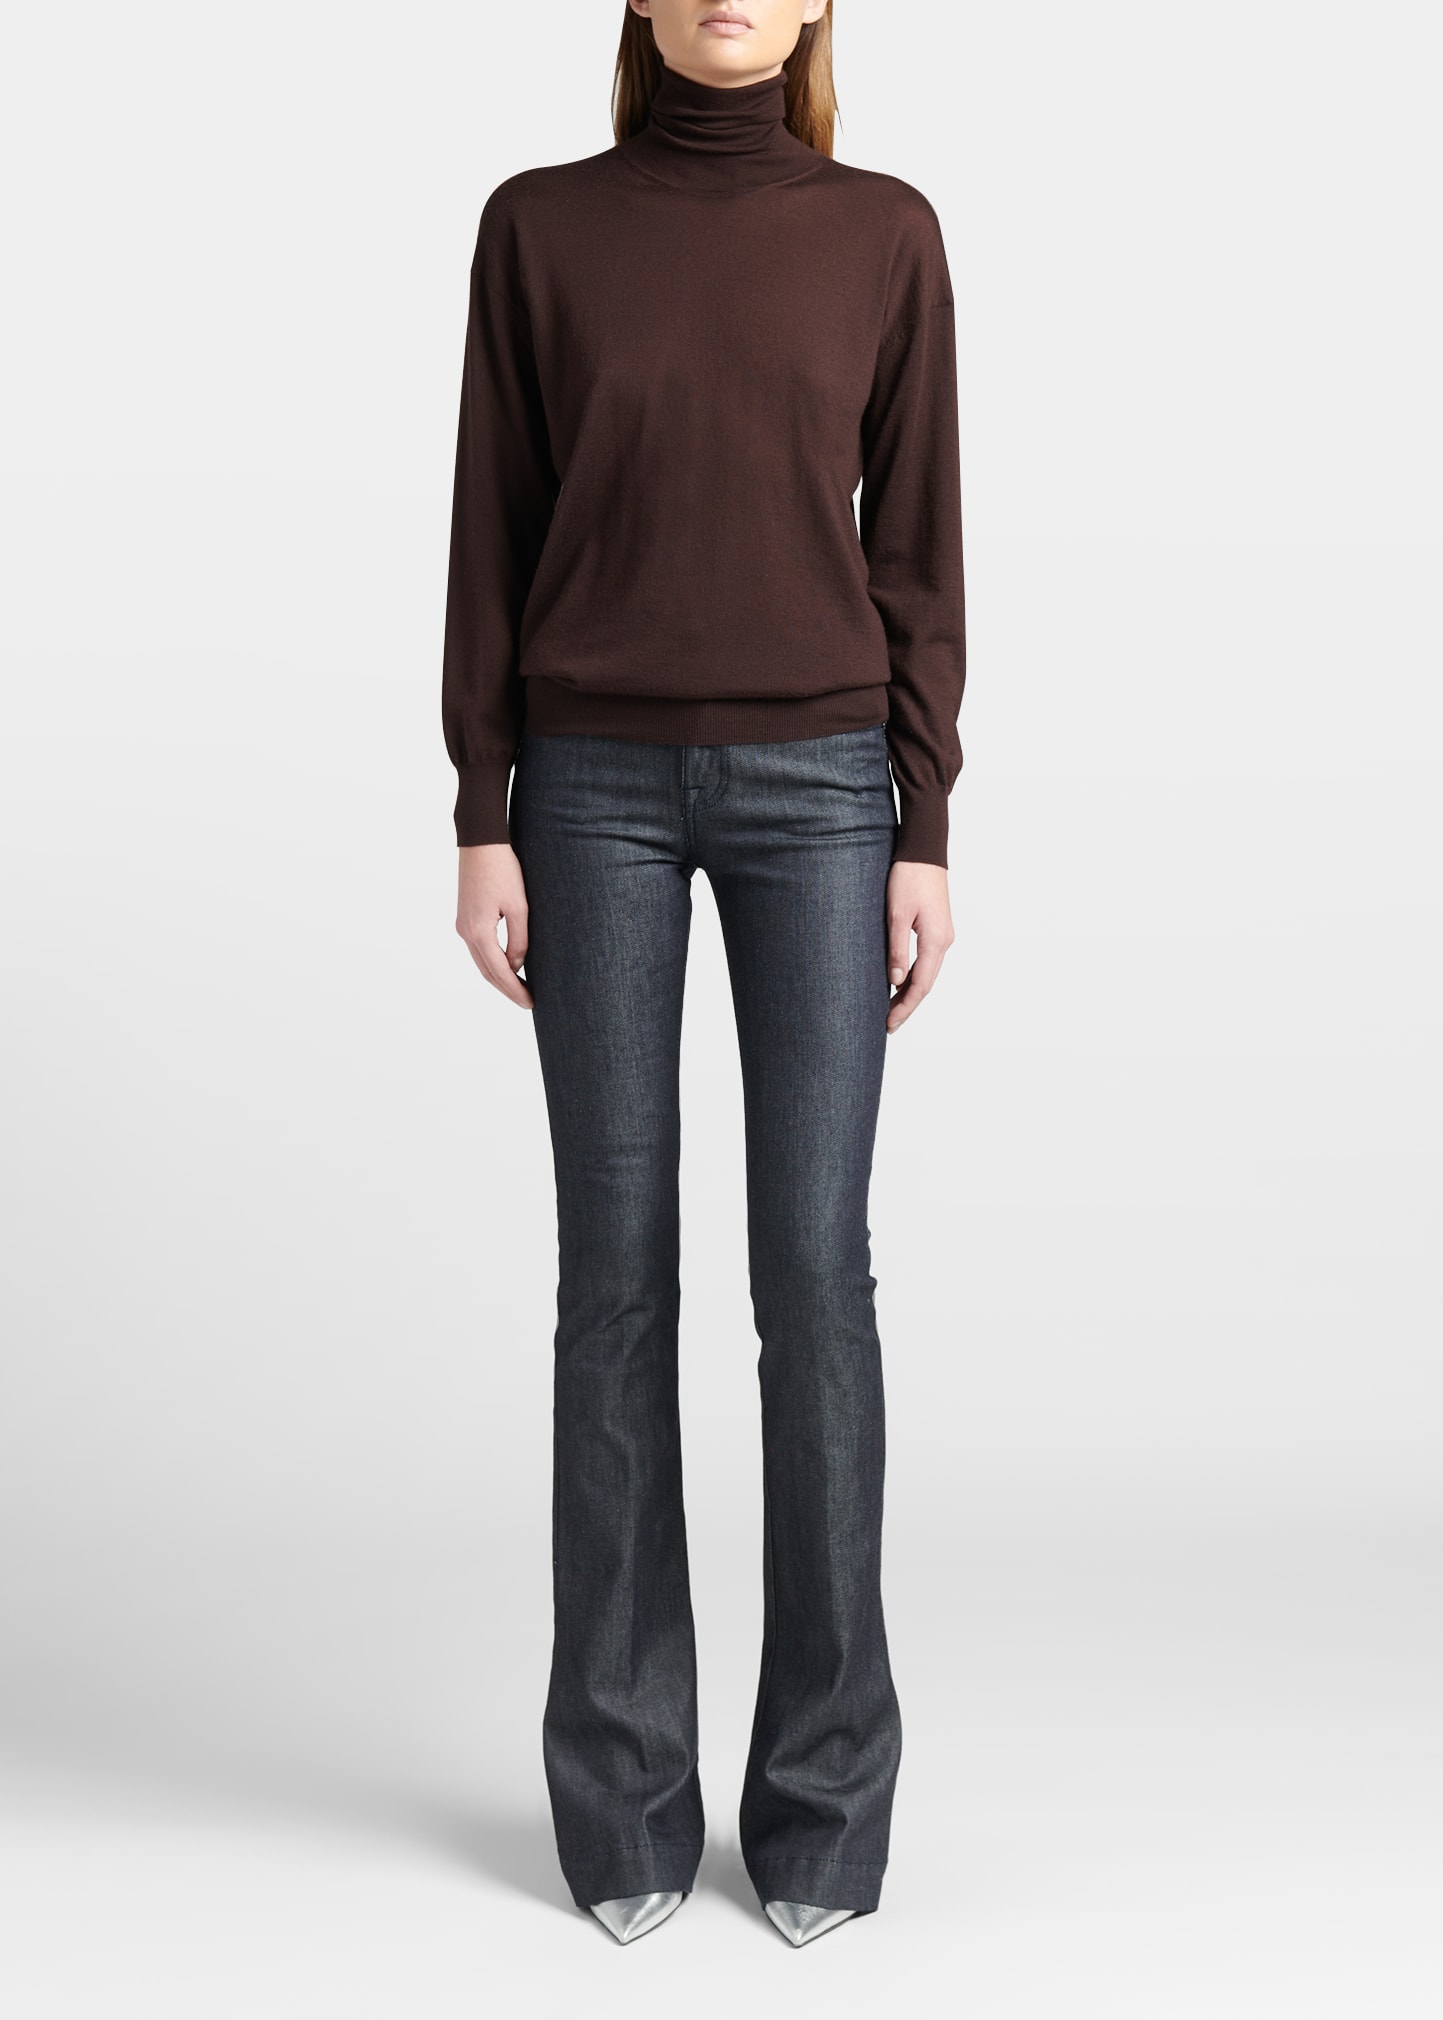 Tom Ford Cashmere/silk Knit Long-sleeve Turtleneck Sweater In Pecan ...